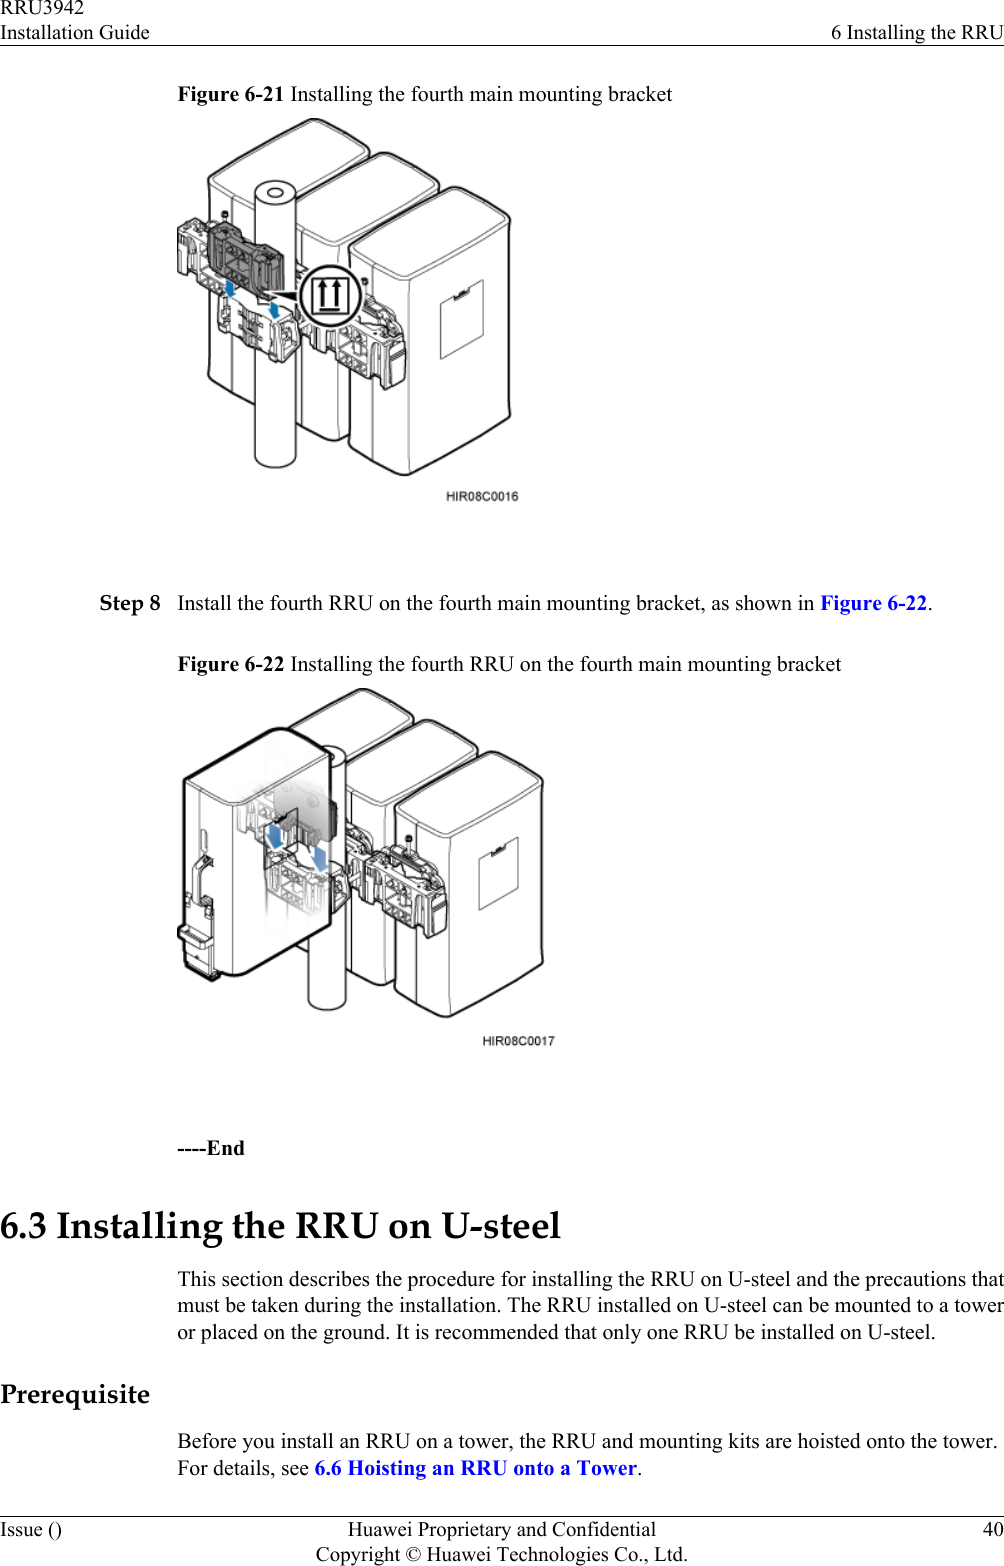 Figure 6-21 Installing the fourth main mounting bracket Step 8 Install the fourth RRU on the fourth main mounting bracket, as shown in Figure 6-22.Figure 6-22 Installing the fourth RRU on the fourth main mounting bracket ----End6.3 Installing the RRU on U-steelThis section describes the procedure for installing the RRU on U-steel and the precautions thatmust be taken during the installation. The RRU installed on U-steel can be mounted to a toweror placed on the ground. It is recommended that only one RRU be installed on U-steel.PrerequisiteBefore you install an RRU on a tower, the RRU and mounting kits are hoisted onto the tower.For details, see 6.6 Hoisting an RRU onto a Tower.RRU3942Installation Guide 6 Installing the RRUIssue () Huawei Proprietary and ConfidentialCopyright © Huawei Technologies Co., Ltd.40